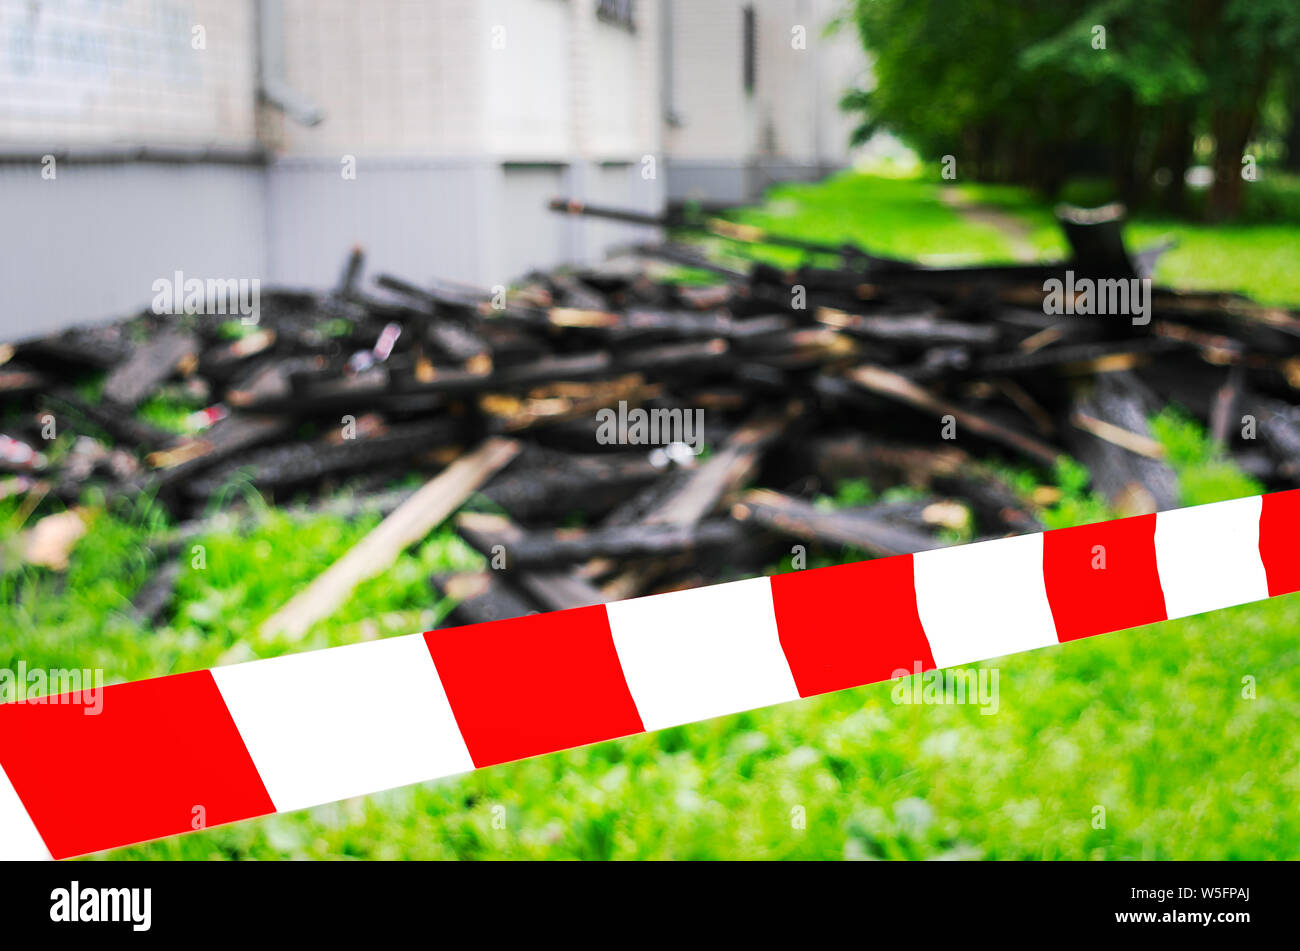 Red and White Safety Tape and Black Charred Rafters, Roof Framework on the Lawn near the Apartment Building after the Fire. Safety, Insurance Concept. Stock Photo